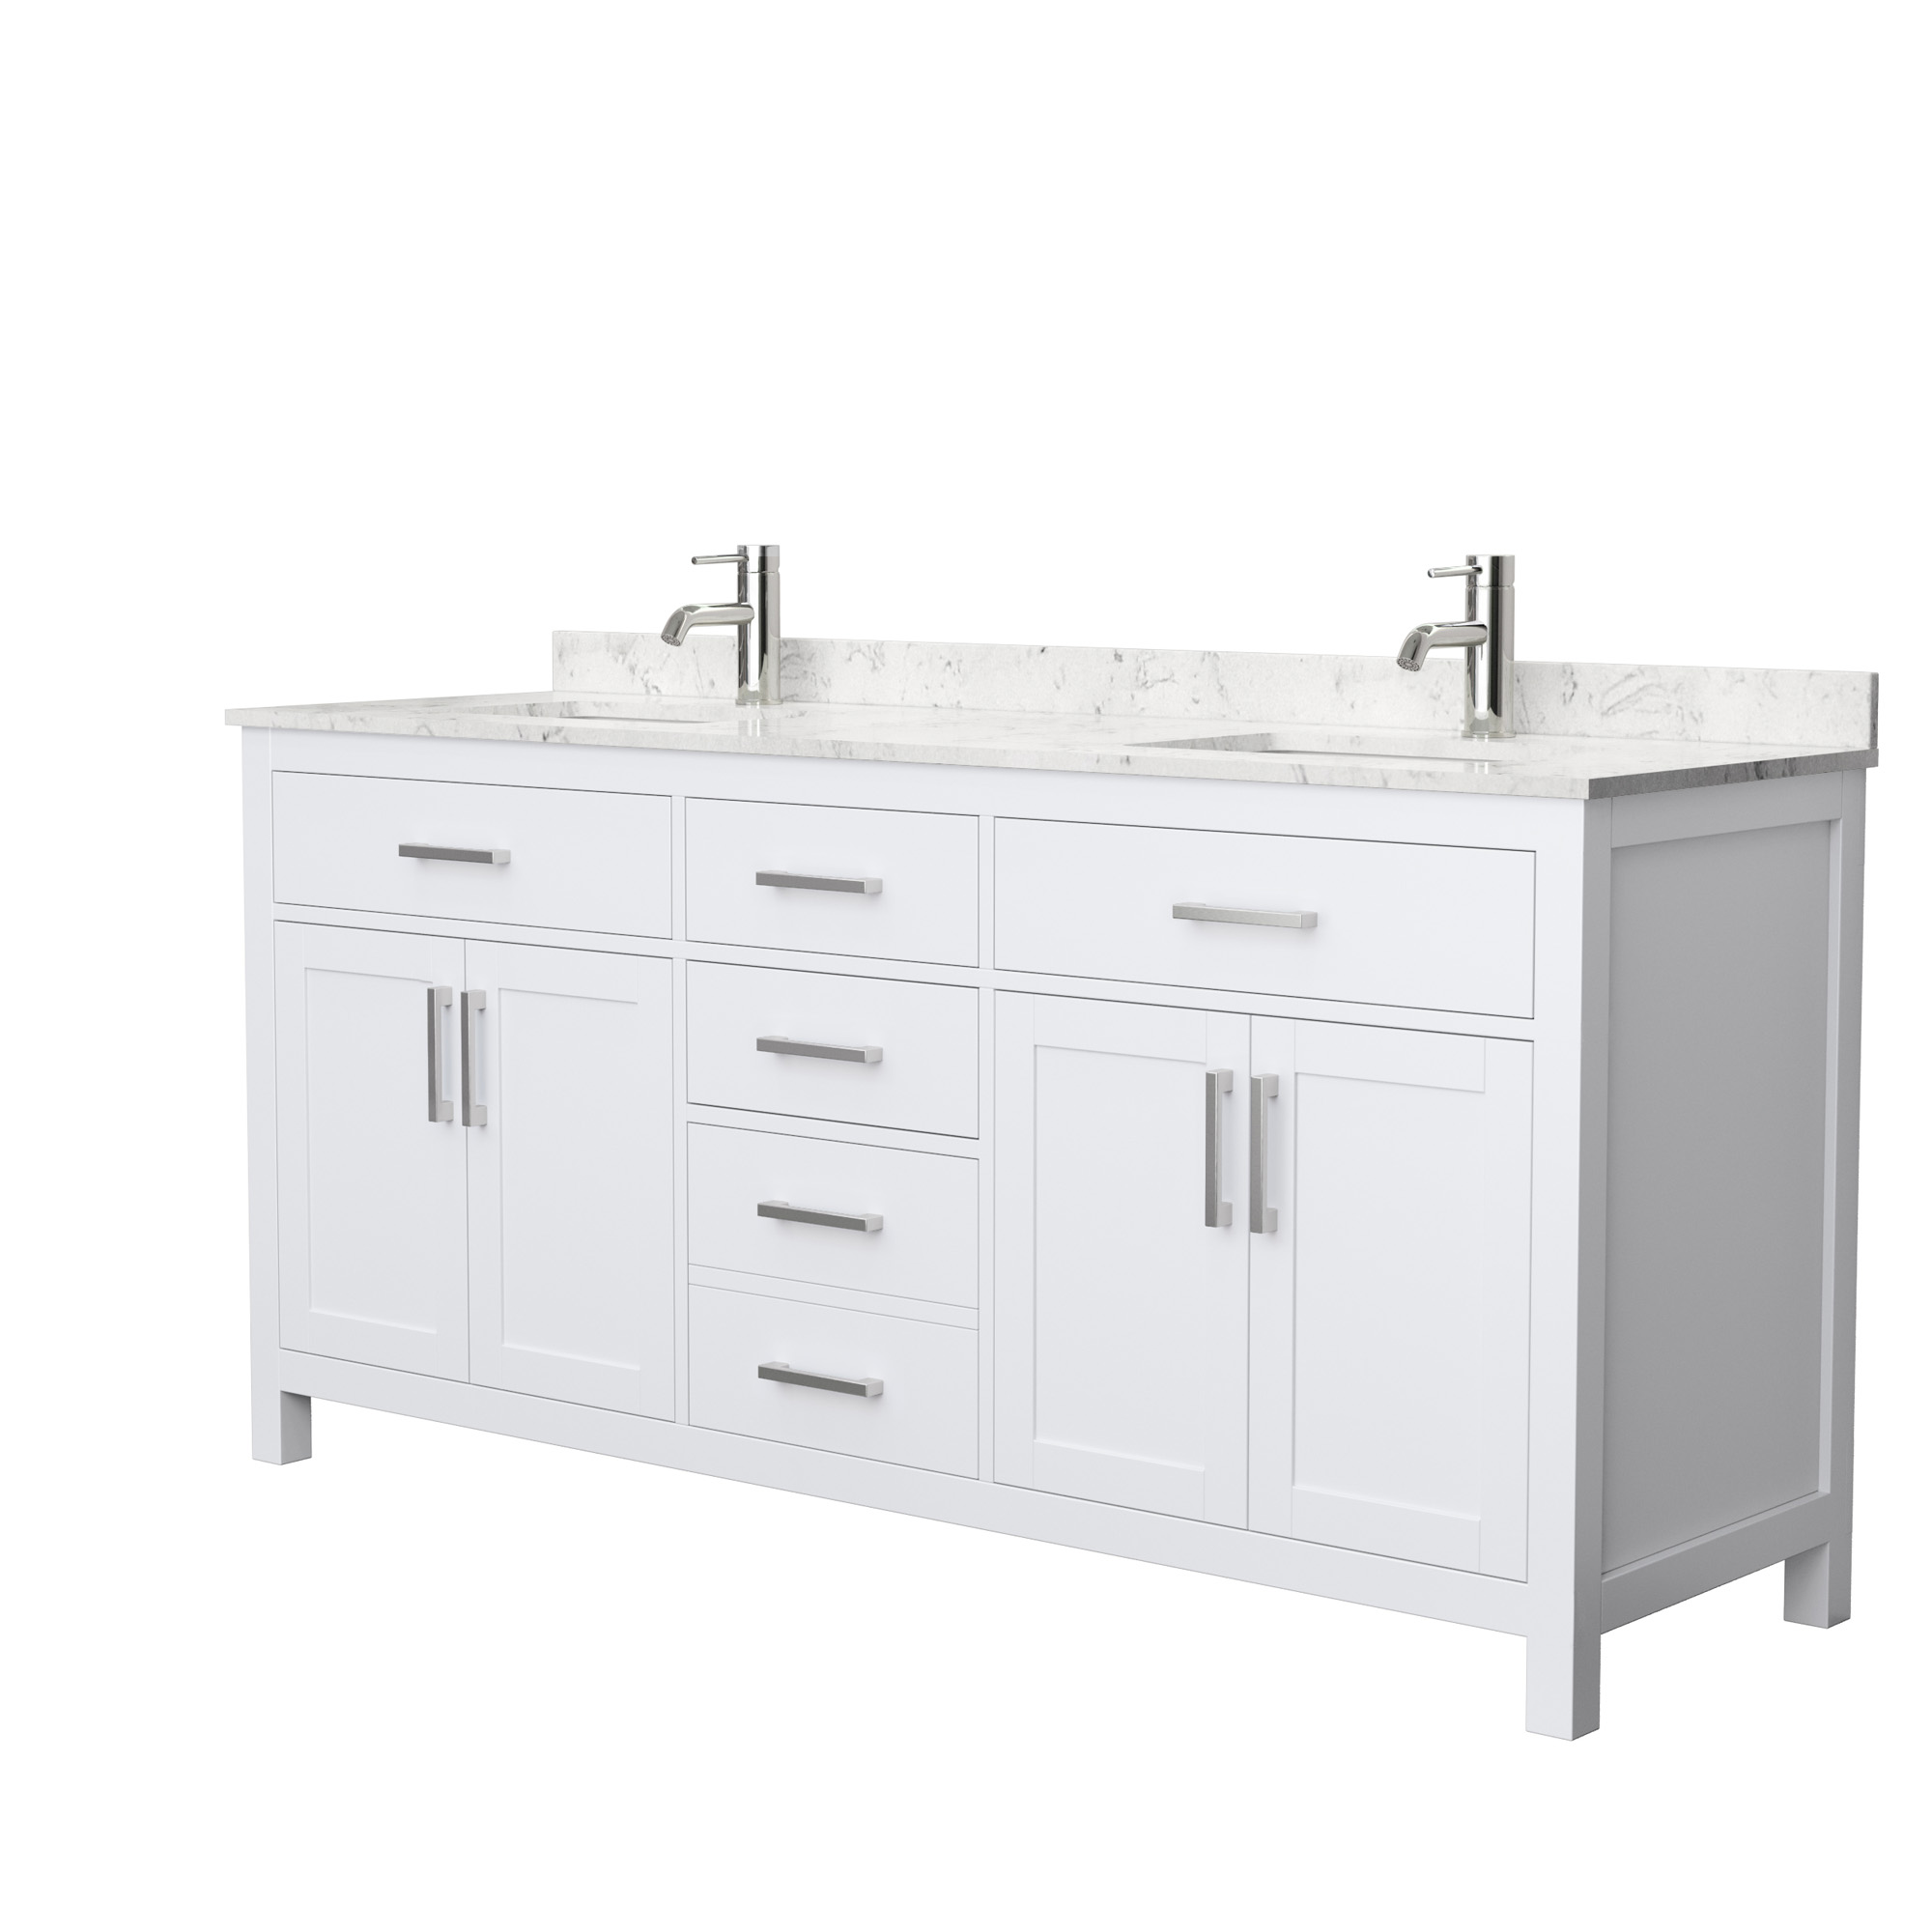 beckett 72" double bathroom vanity by wyndham collection - white